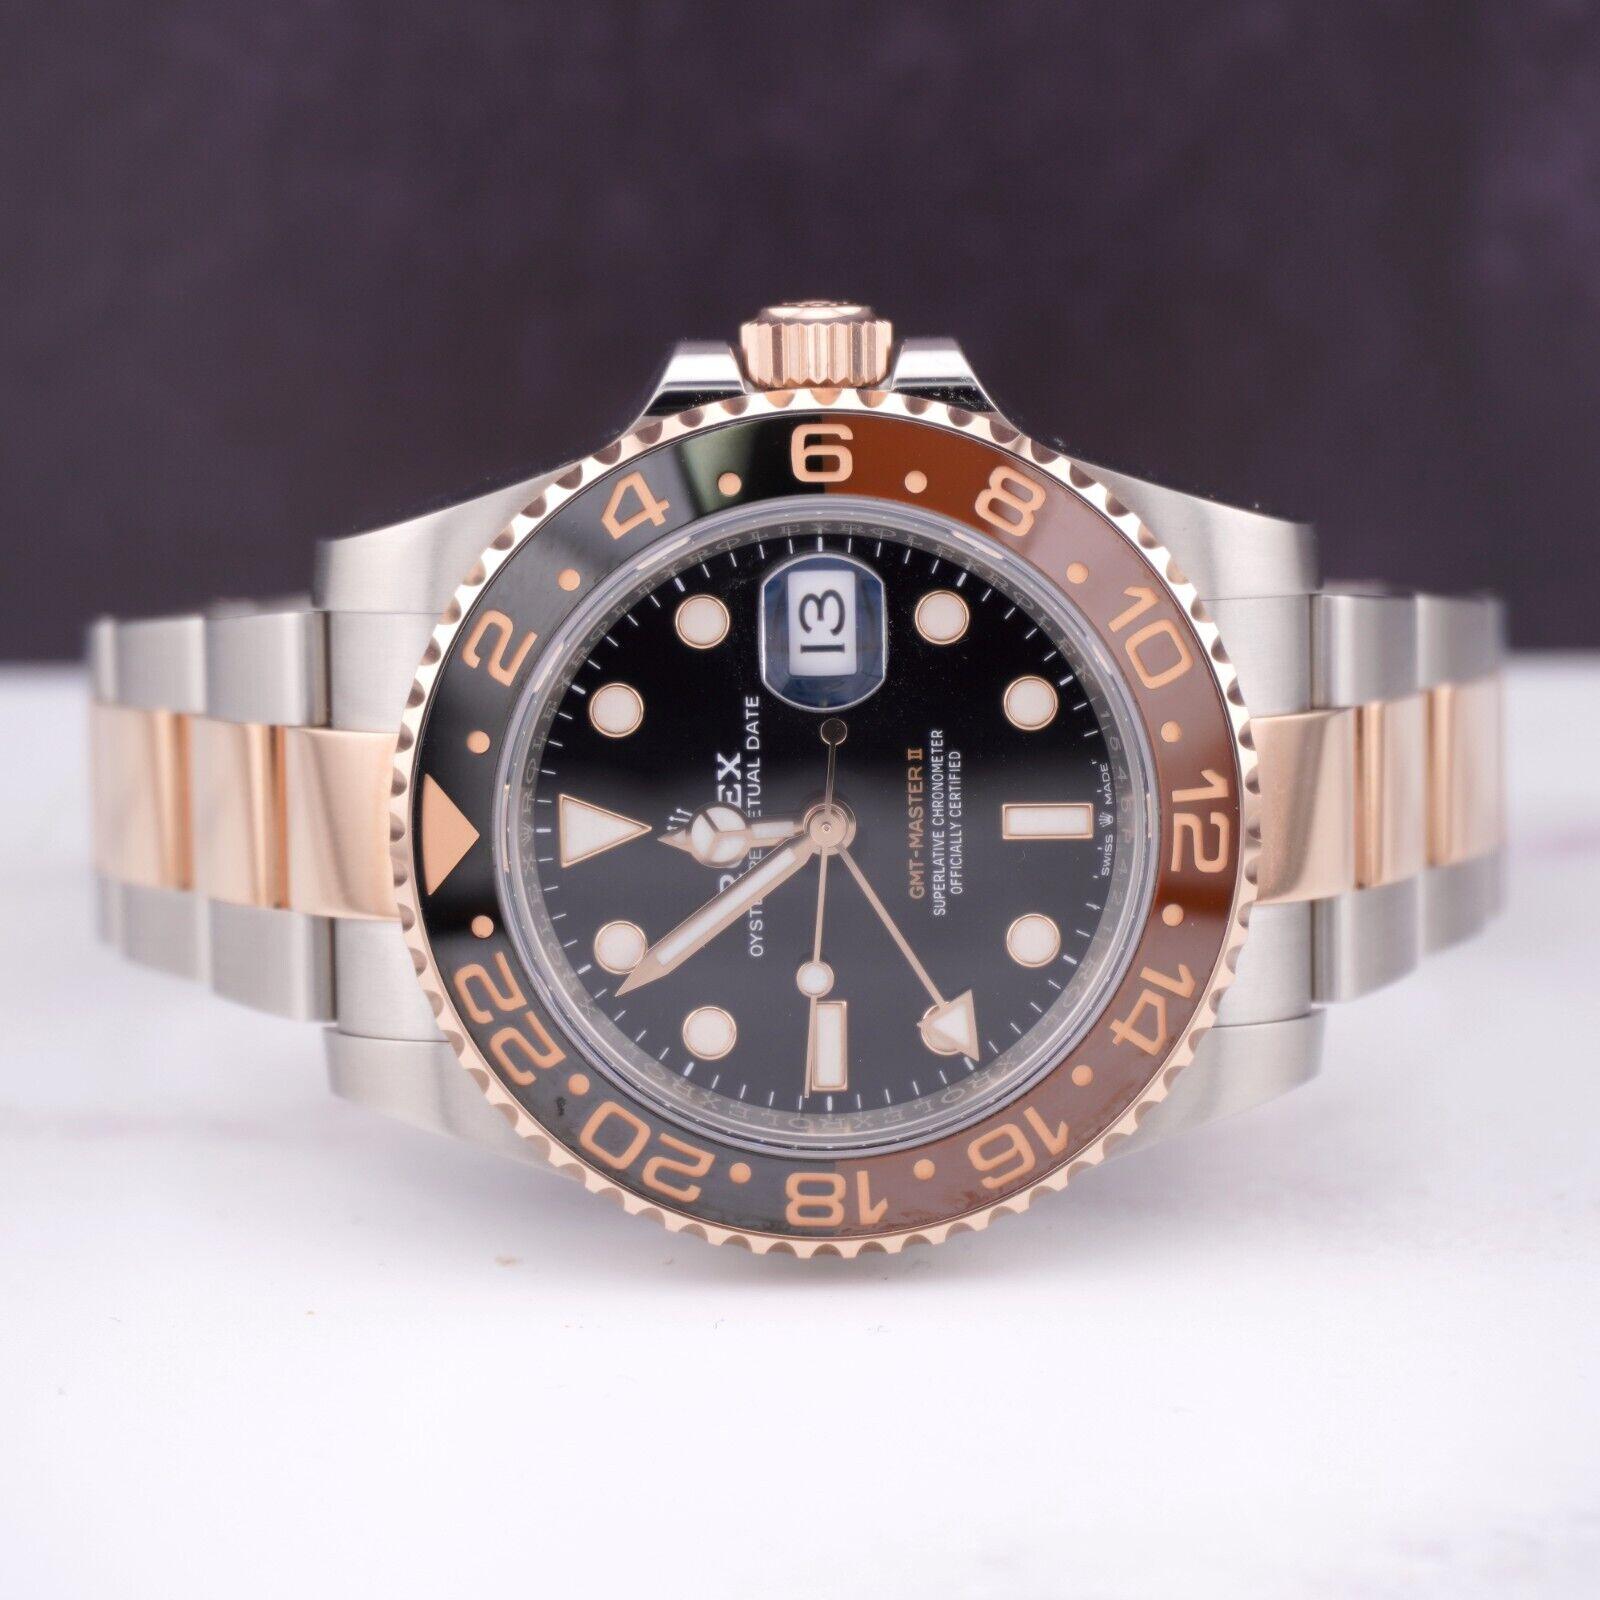 Rolex GMT Master II Root Beer 40mm Watch. A Pre-owned watch w/ Original Box and 2020 Card. Watch is 100% Authentic and Comes with Authenticity Card. Watch Reference is 126711 and is in Excellent Condition (See Pictures). The dial color is Black,